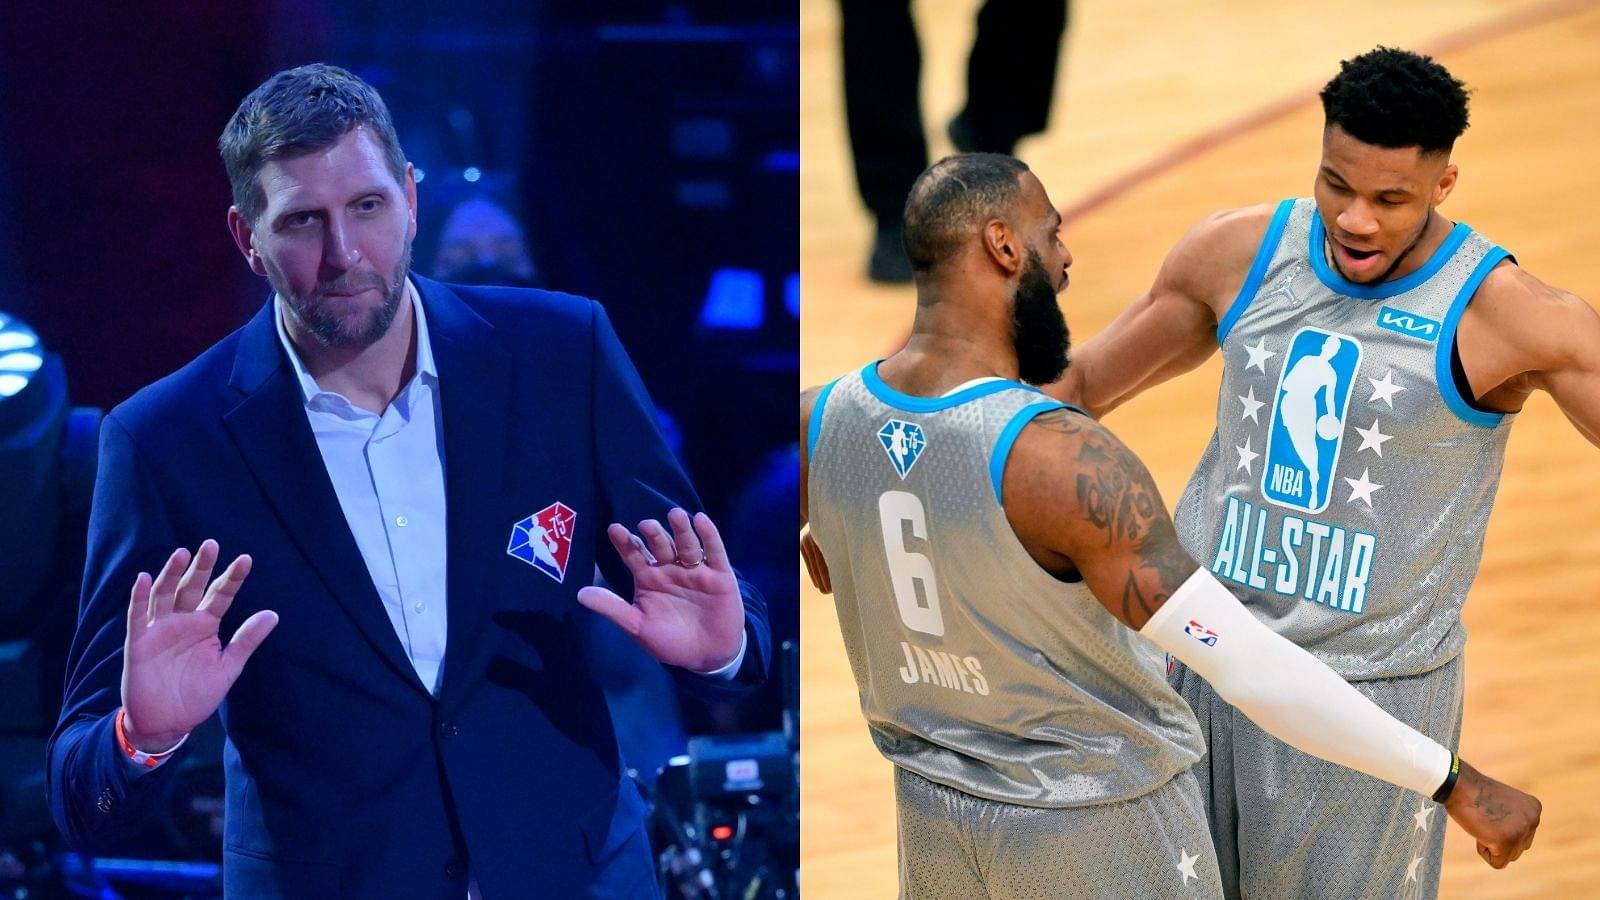 "Being alongside Michael Jordan and Lebron James is insane but sitting next to Dirk Nowitzki..": Giannis Antetokounmpo is humbled to be only the second European on NBA's Top-75 list